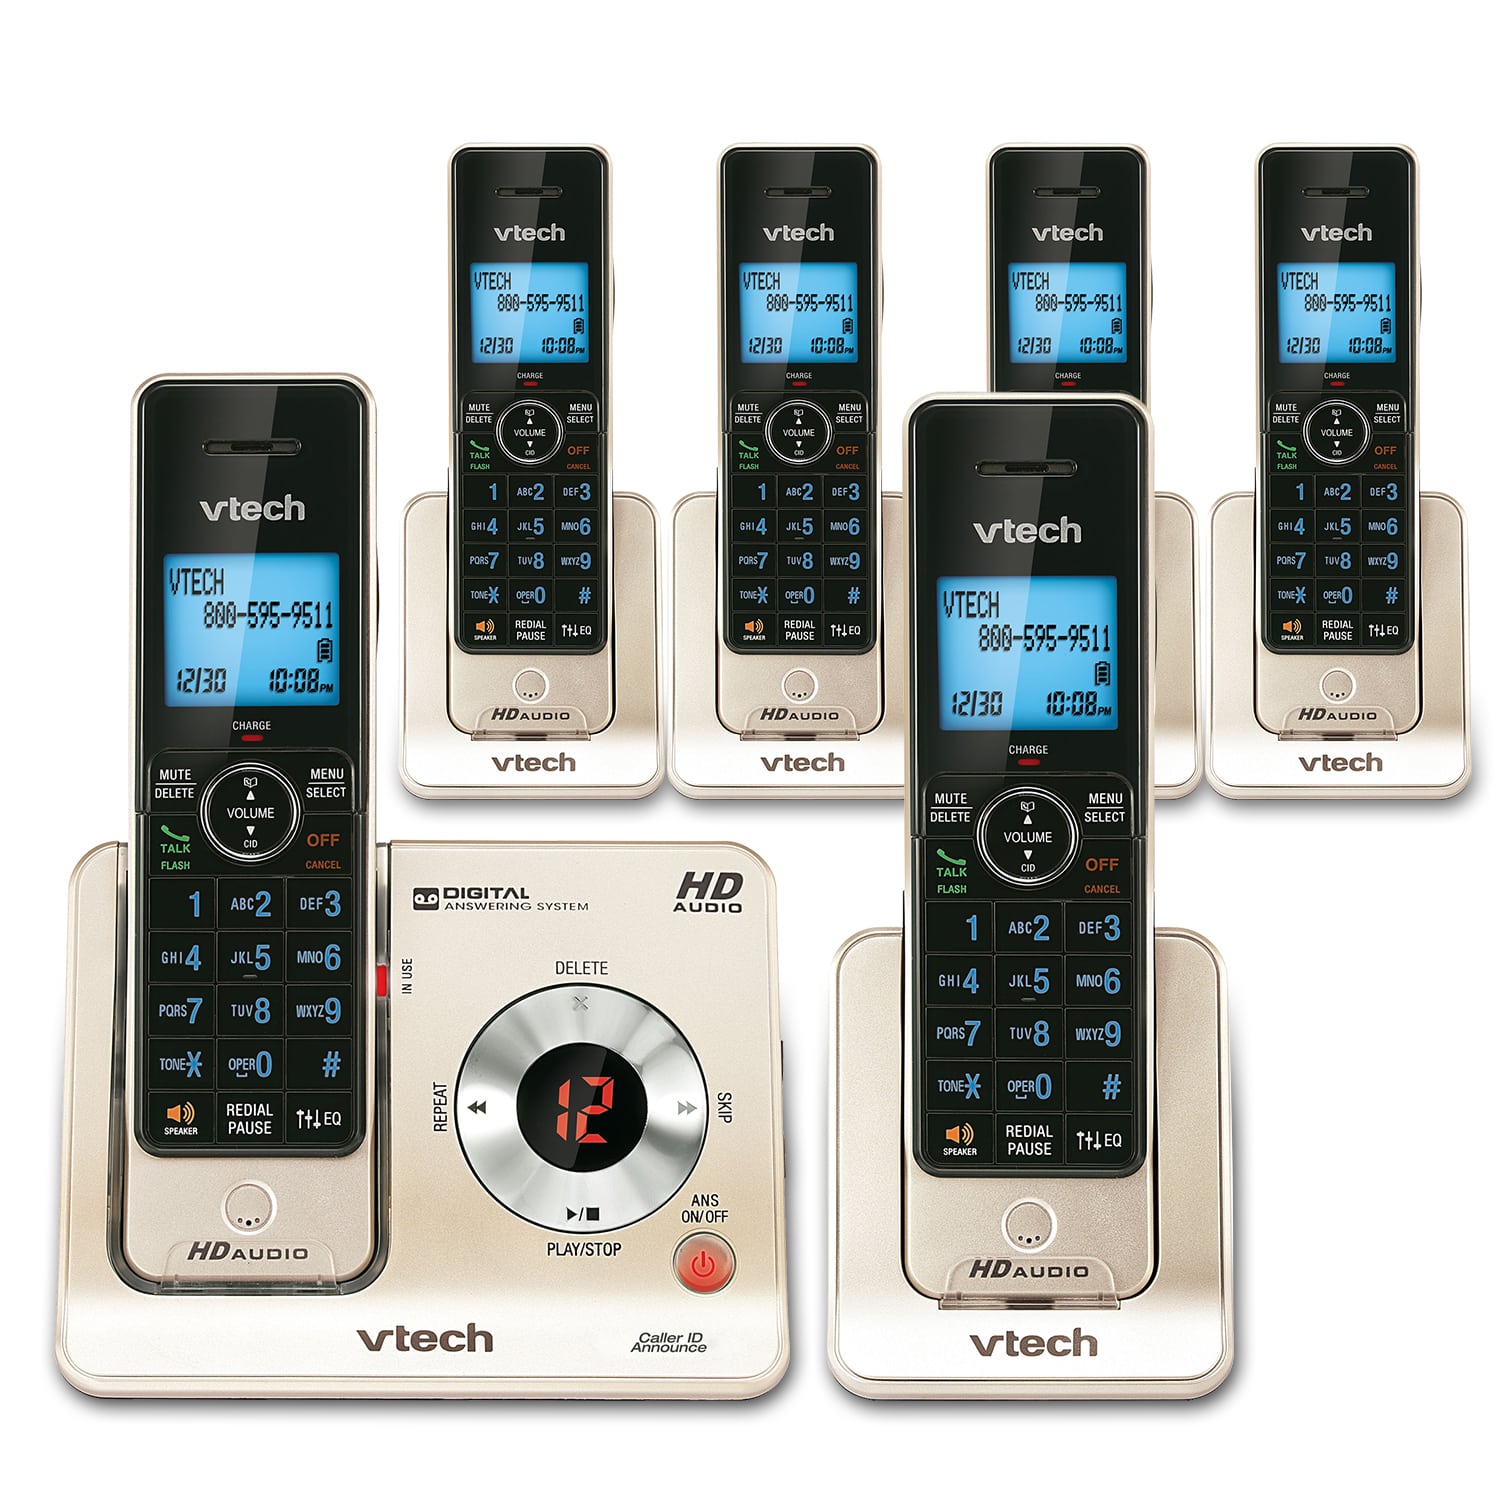 6 Handset Phone System with Caller ID/Call Waiting